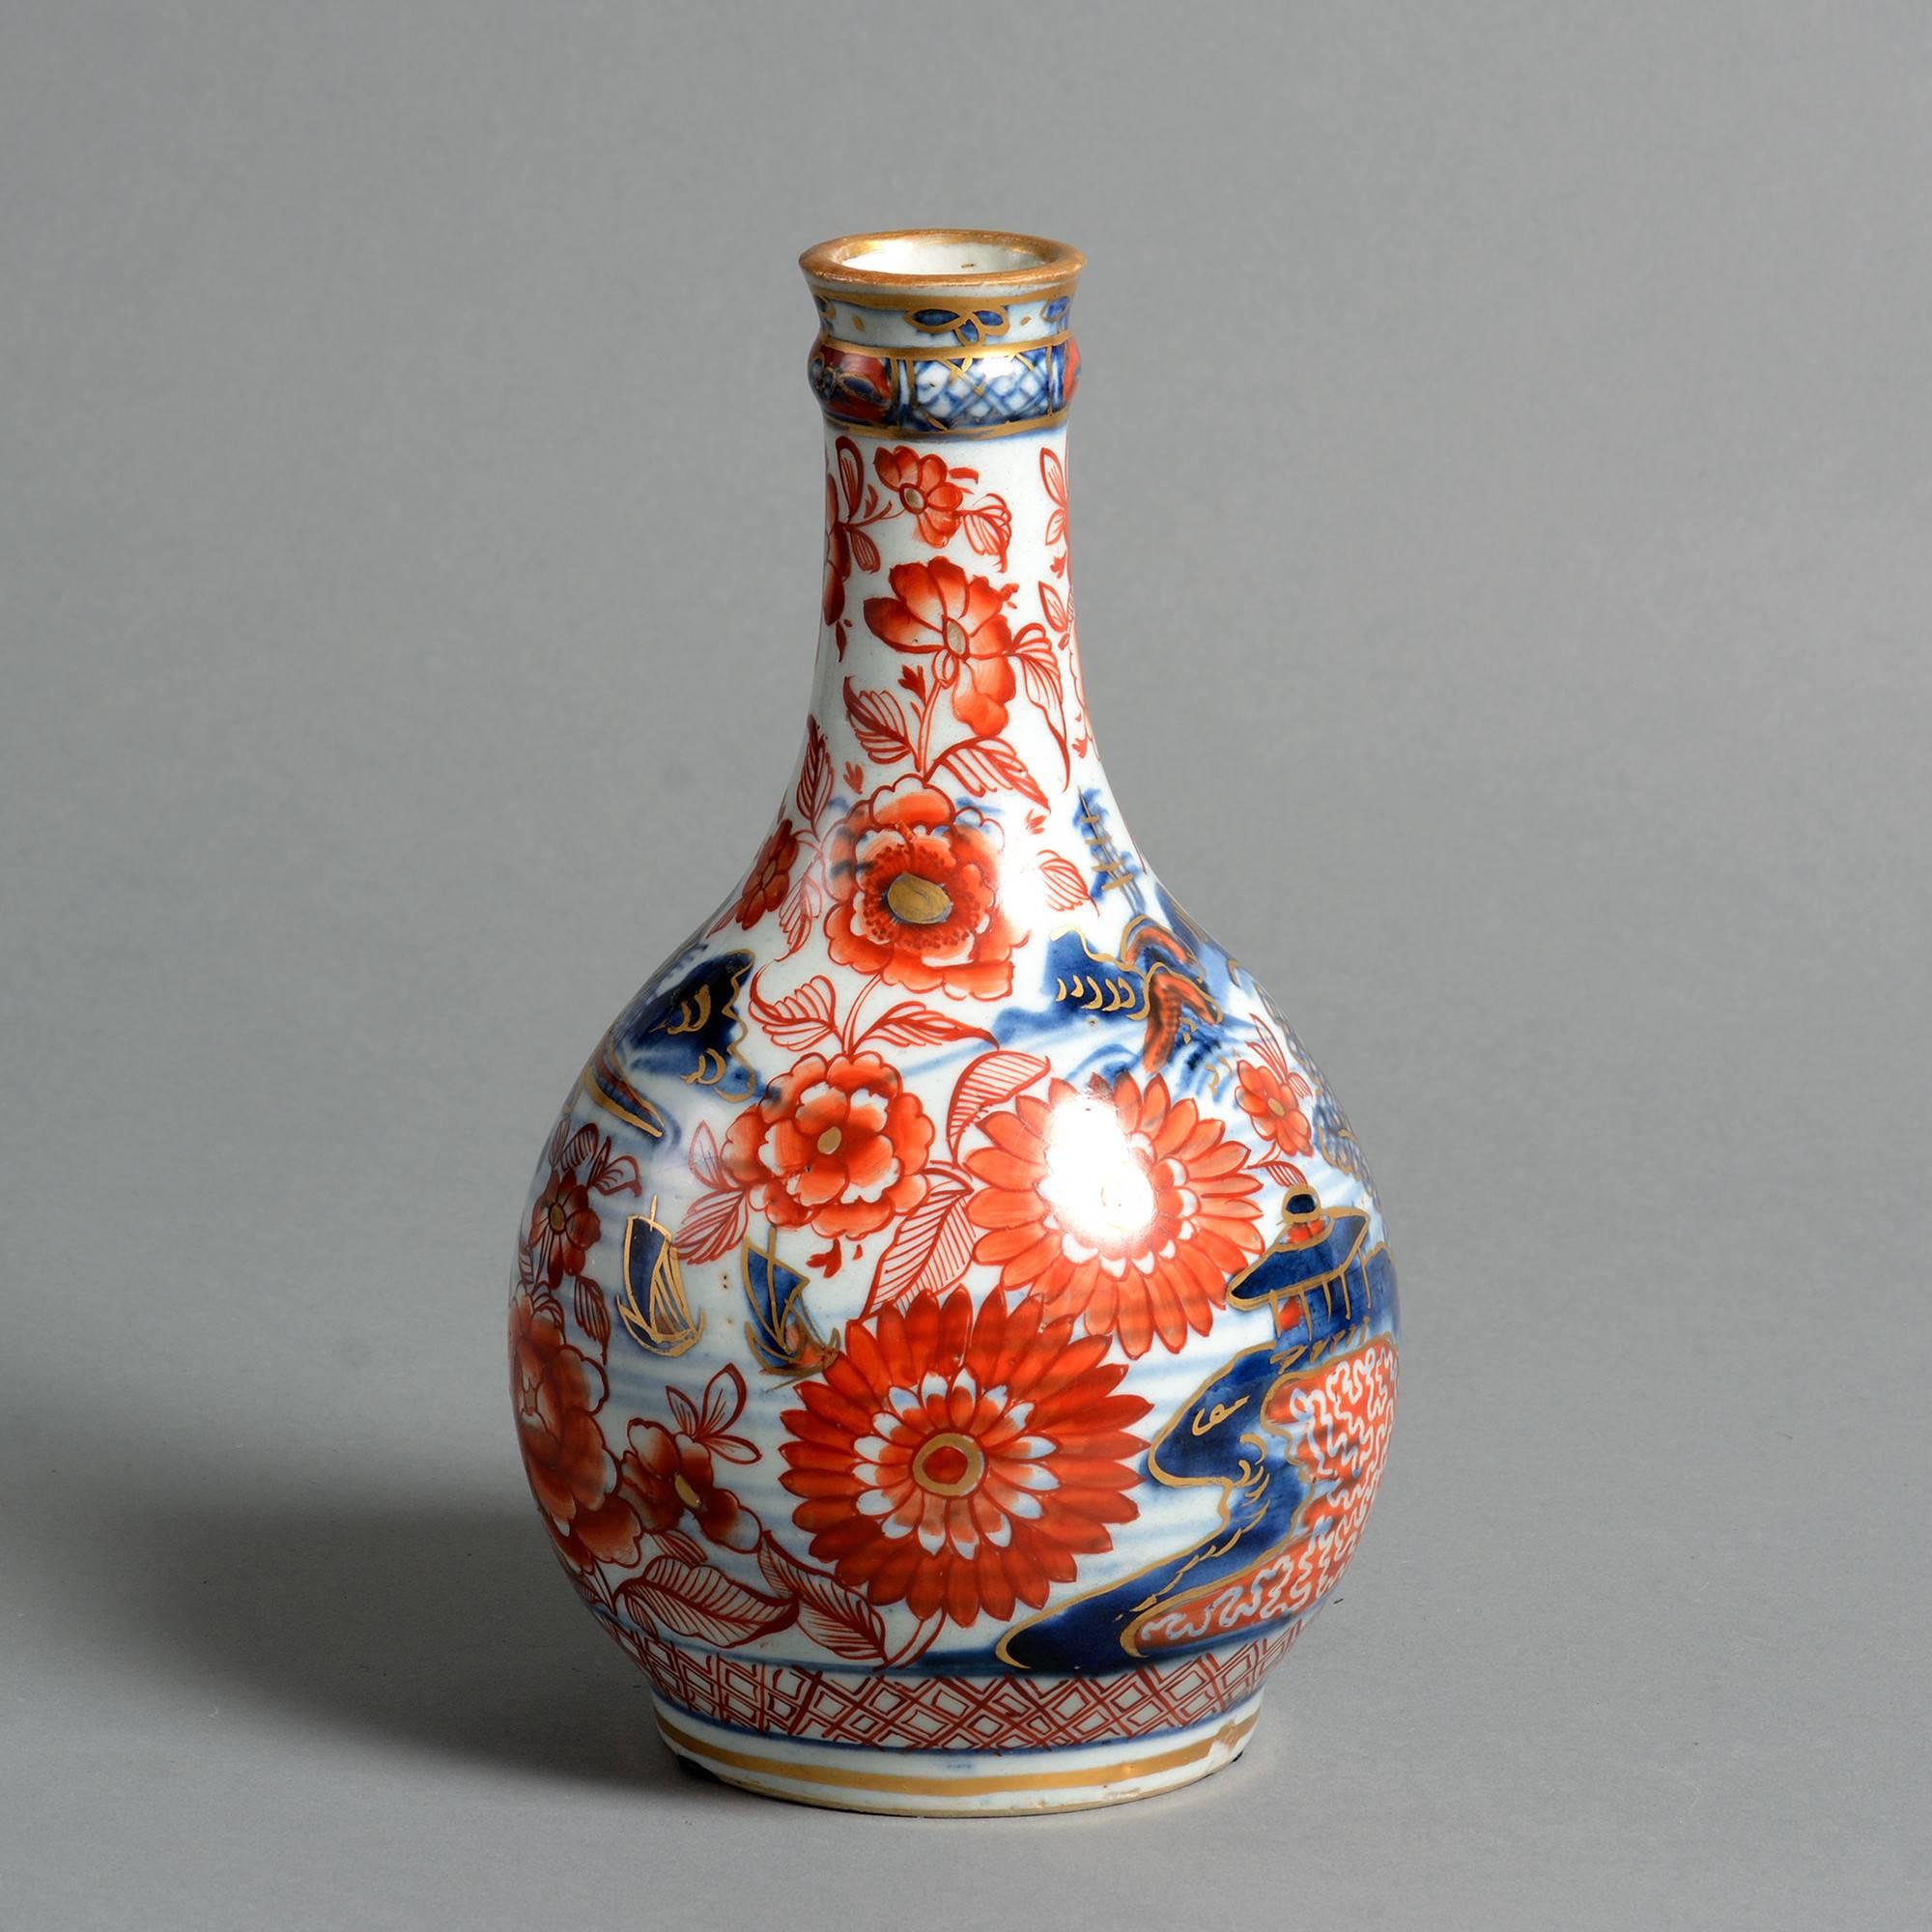 A late 18th century clobbered porcelain bottle vase, with floral decoration throughout. 

Qing dynasty, Jiaqing period (1796-1820).